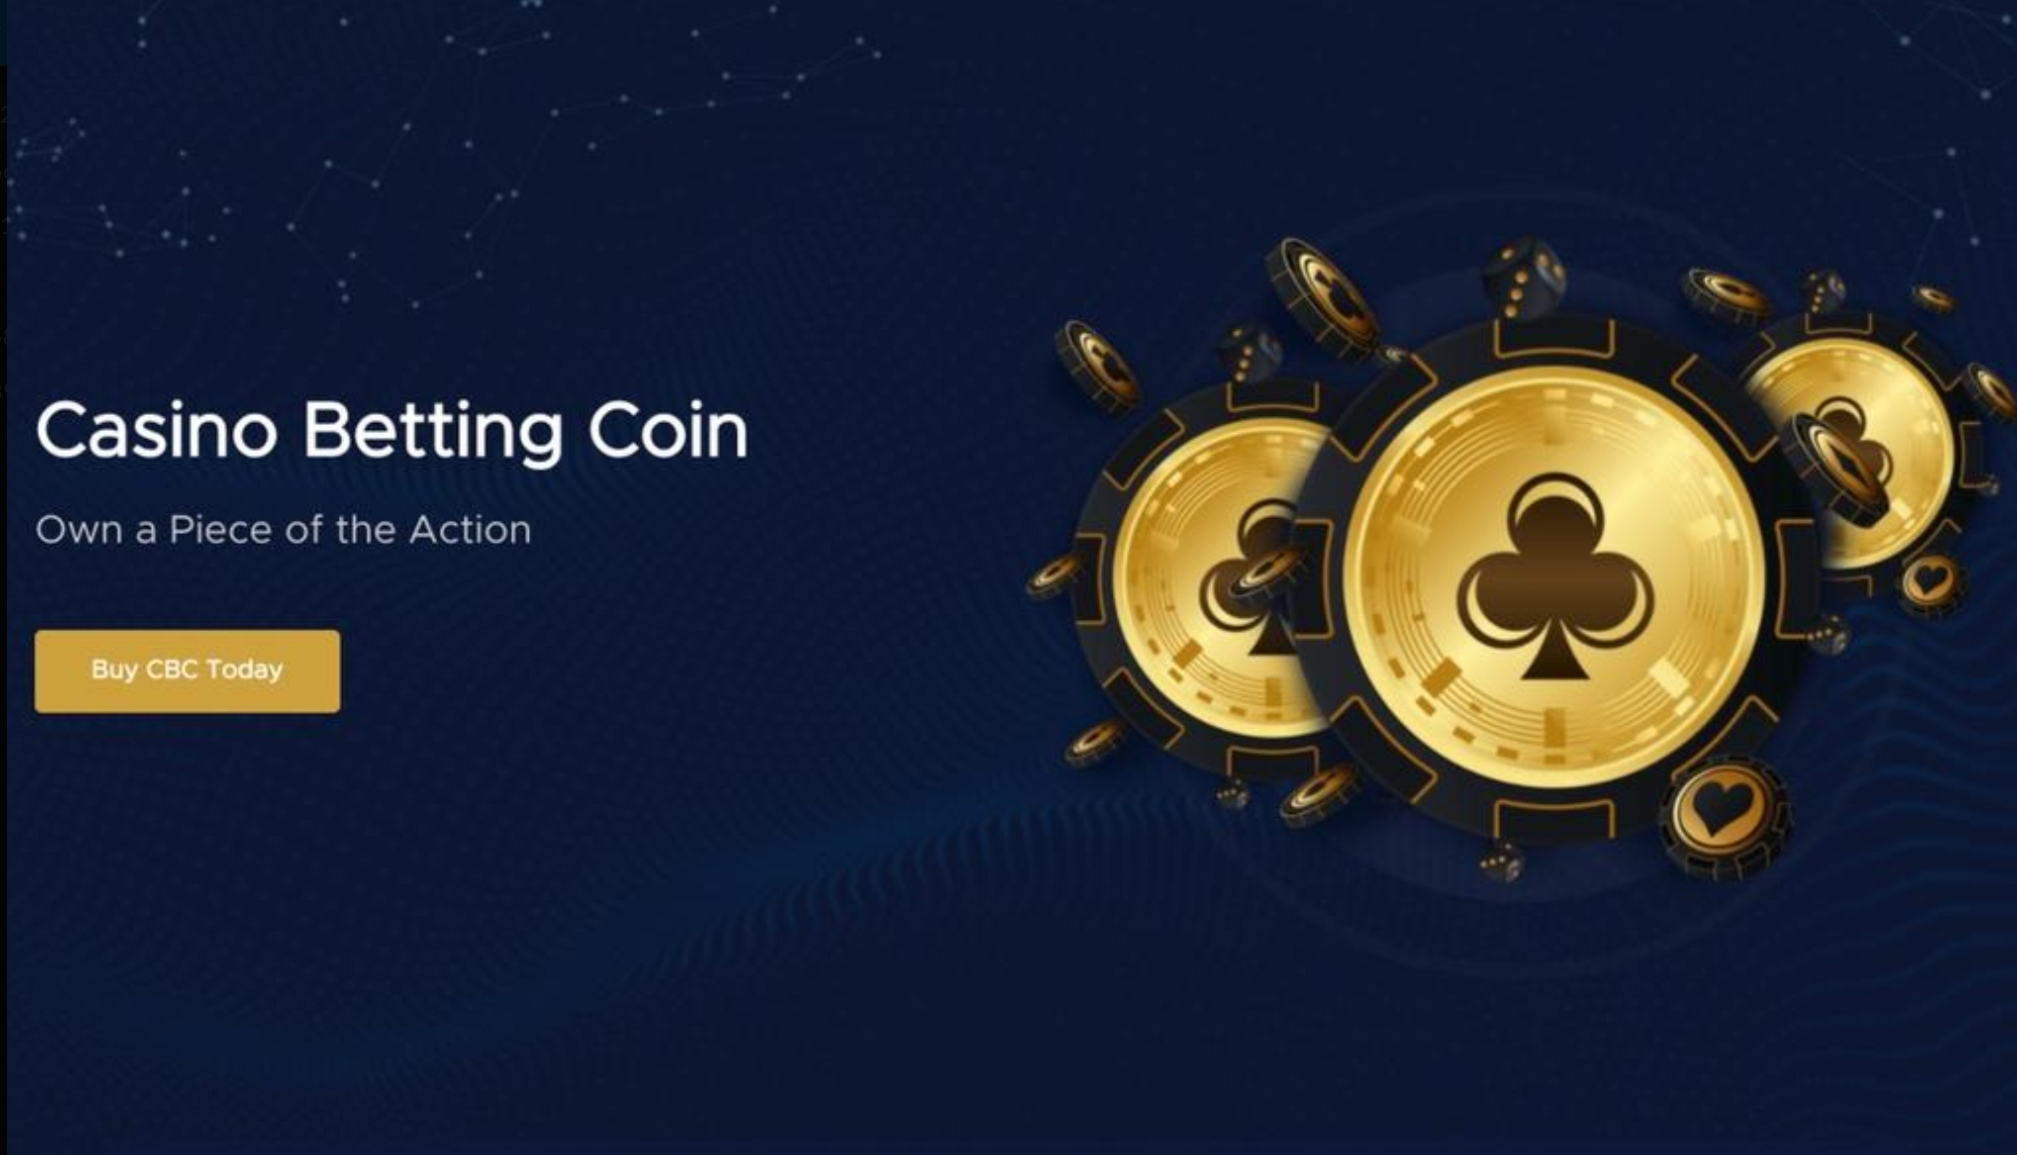 One Million New Users Can Now Enjoy Casino Betting Coin at Top Social Casino